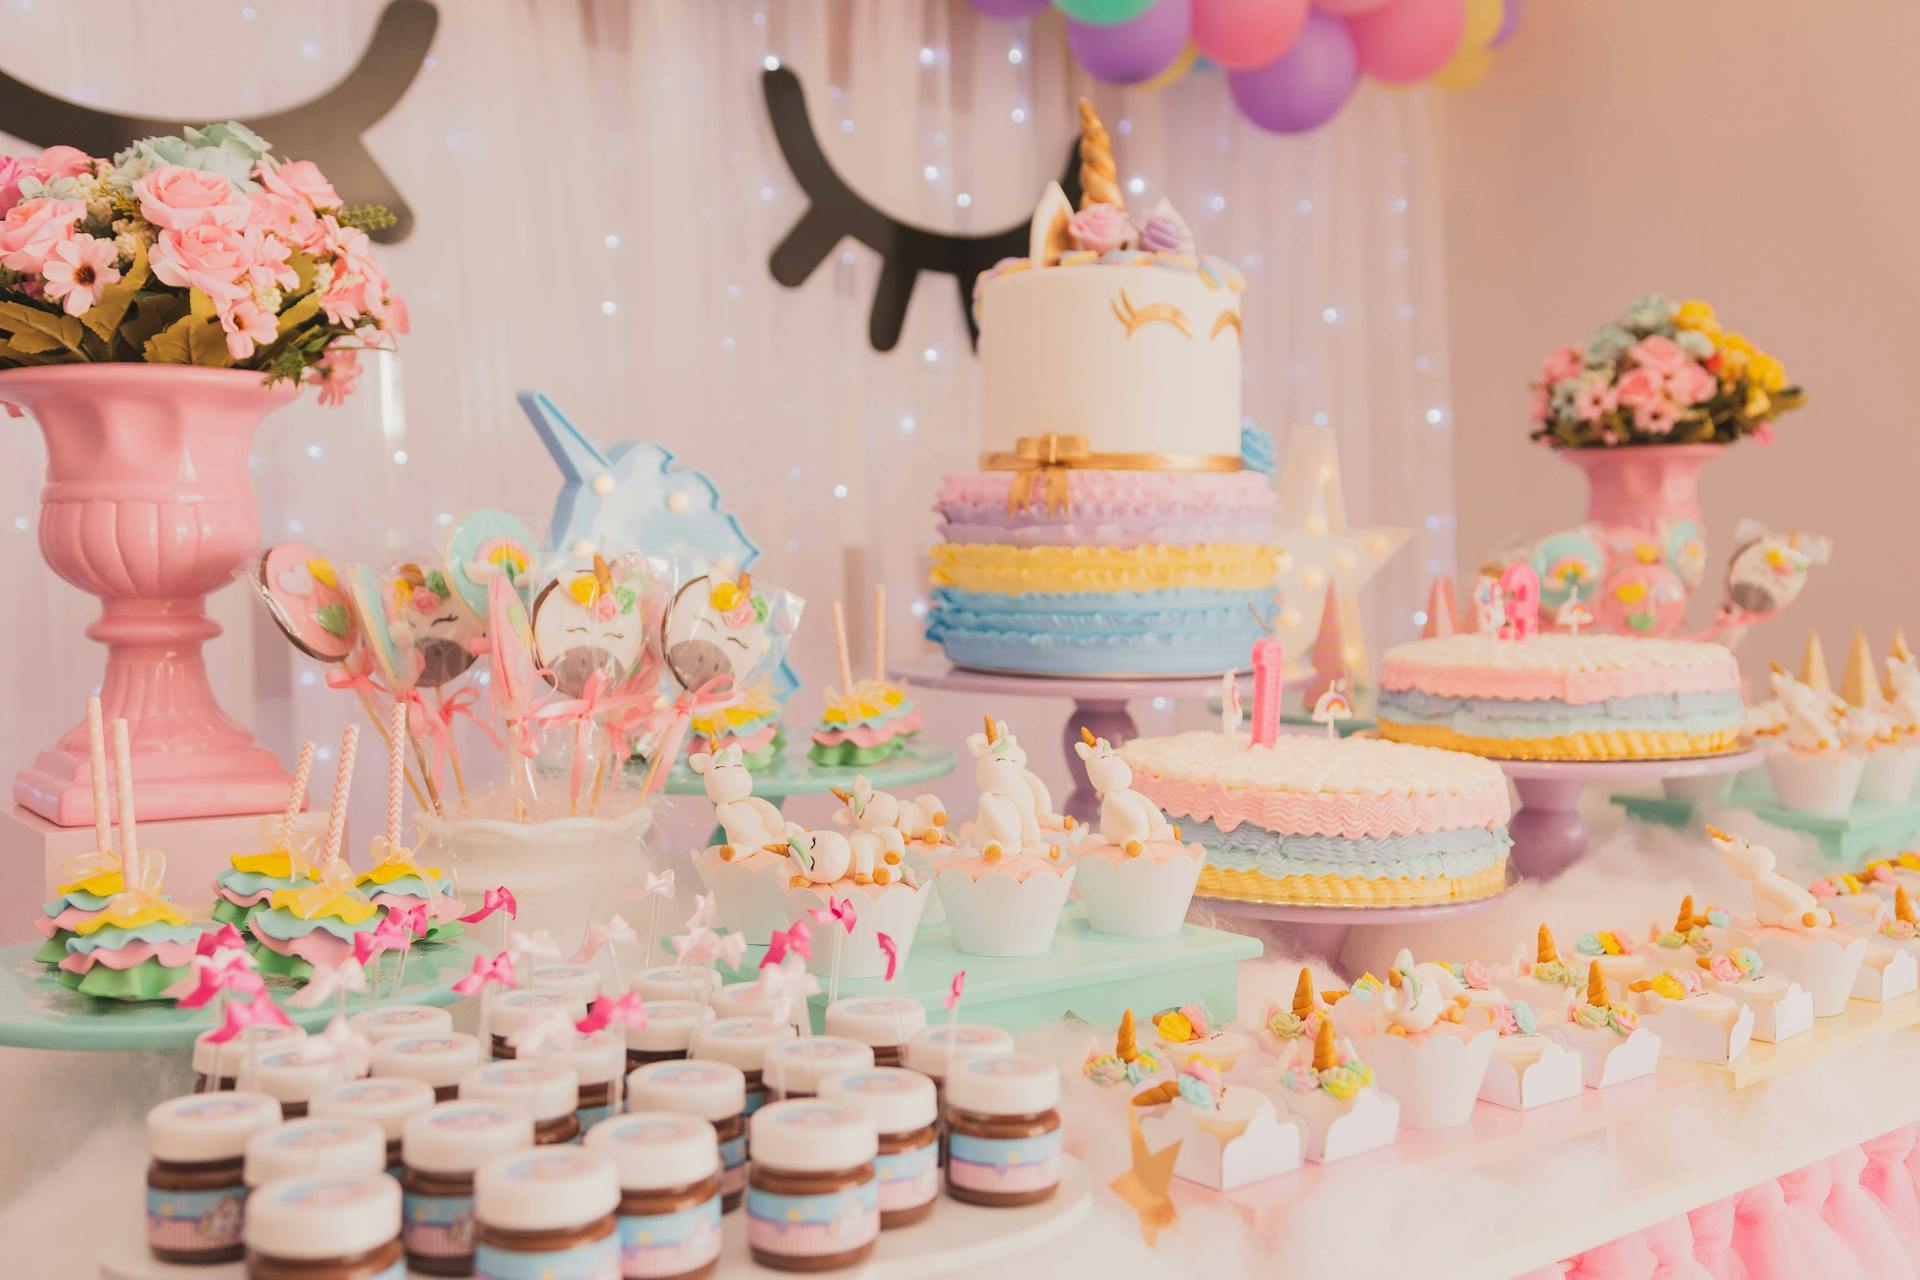 Cakes placed on a table | Source: Pexels